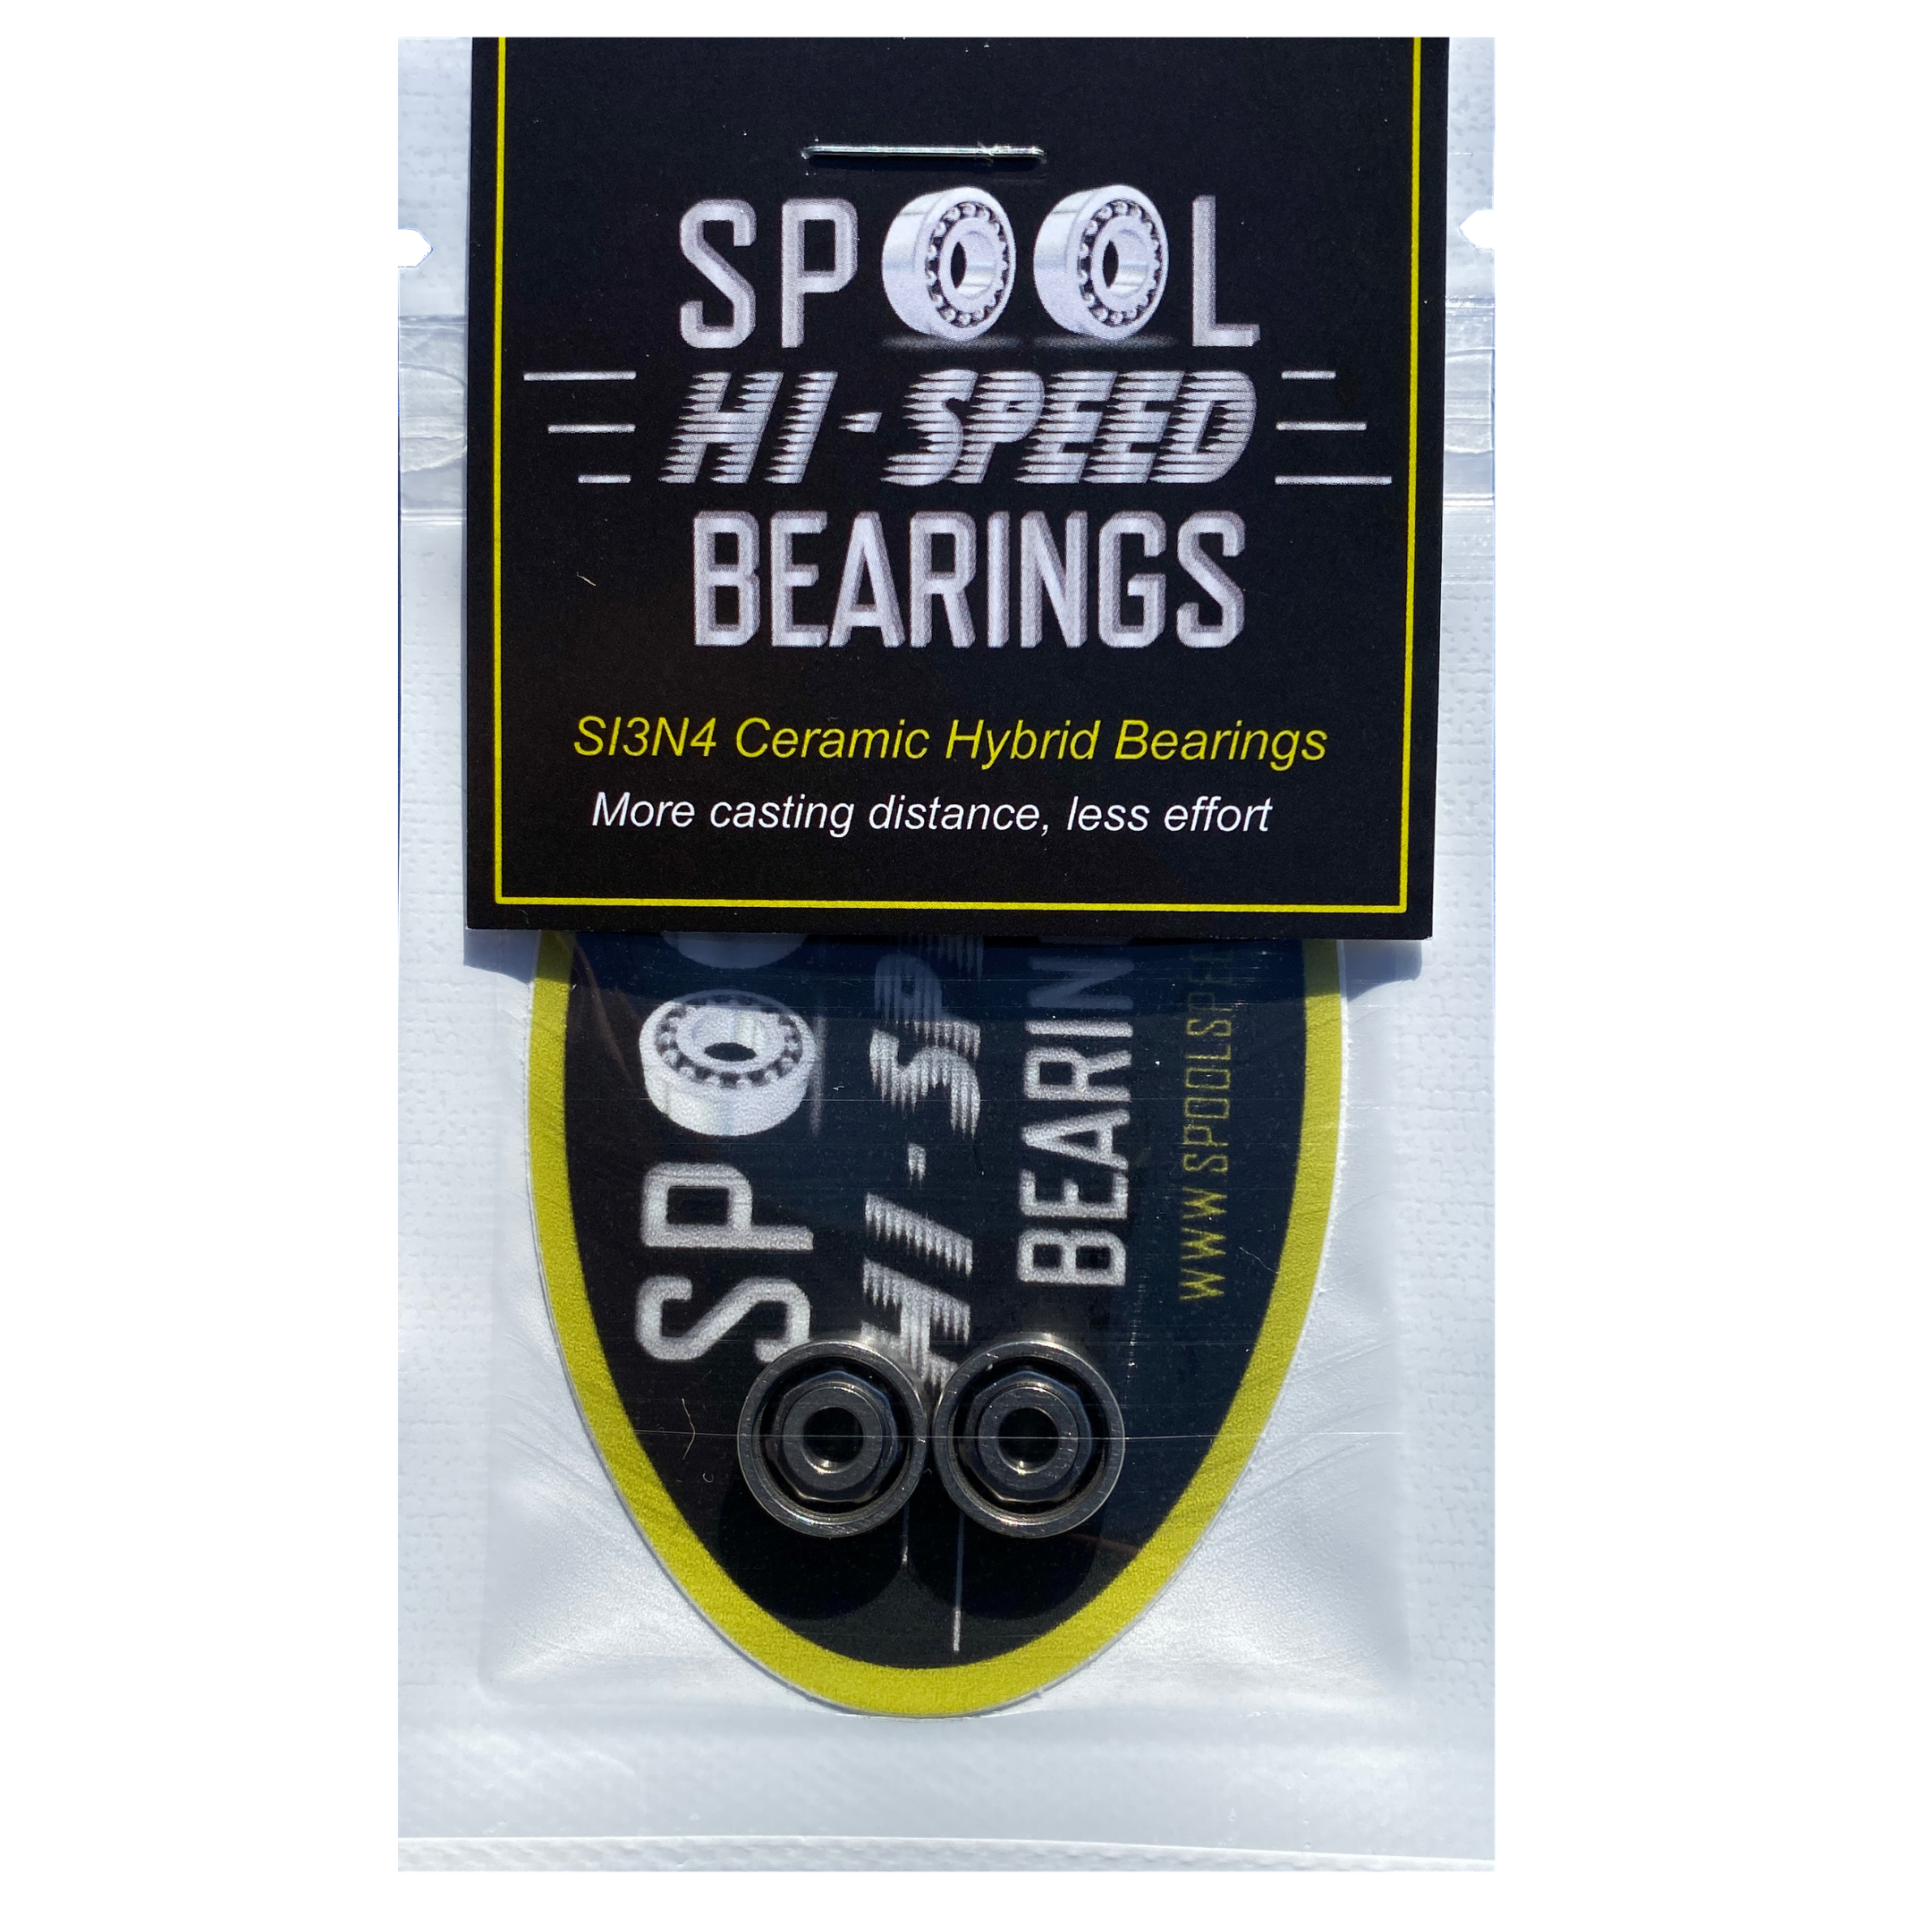 SPOOL SPEED BEARINGS TEST!!! LEGIT OR HYPE? WILL THESE